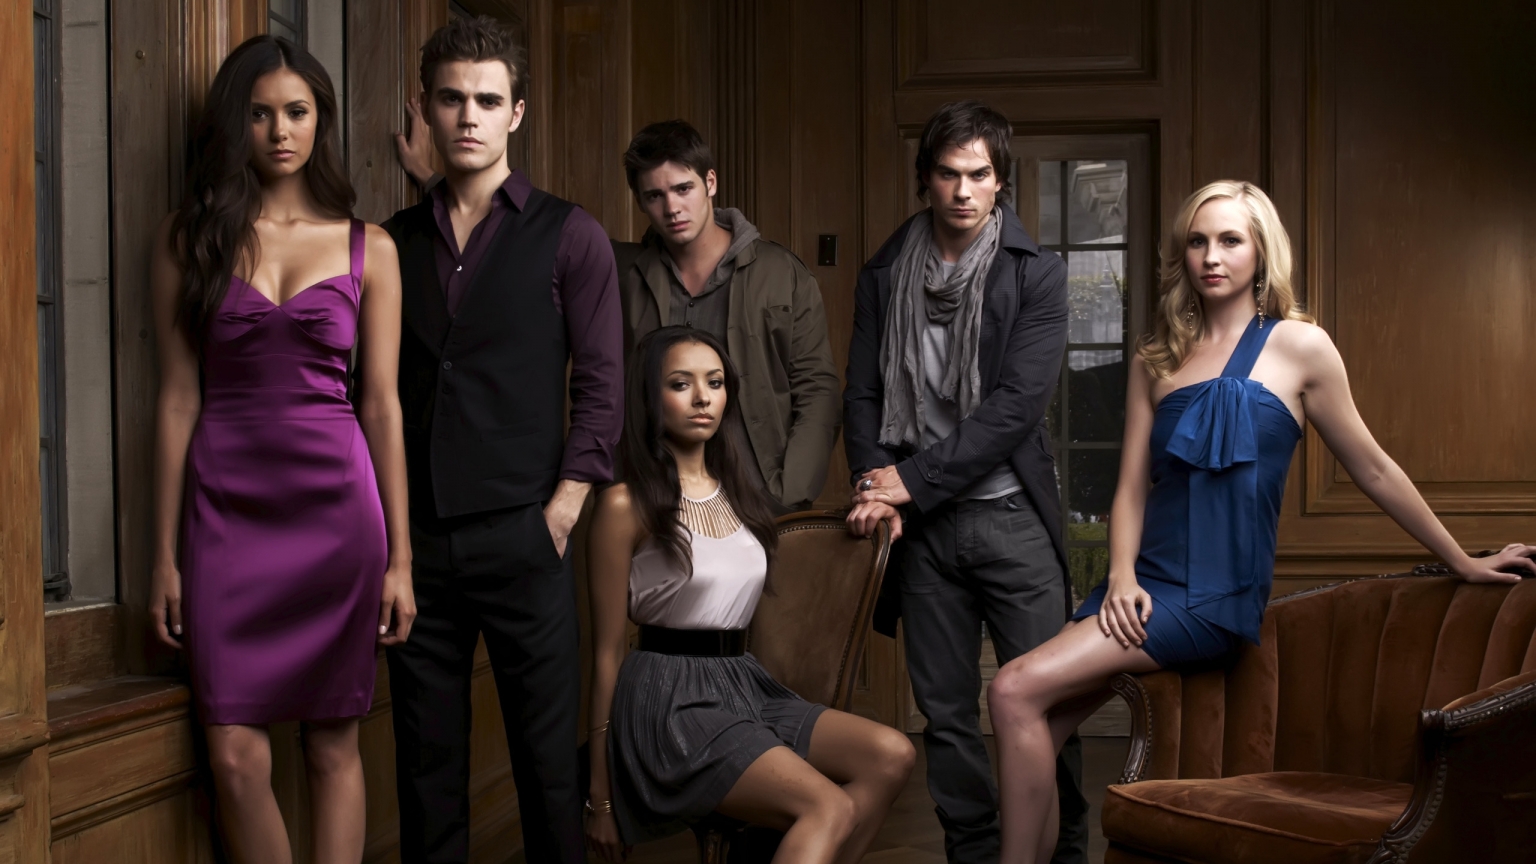 The Vampire Diaries Cast for 1536 x 864 HDTV resolution